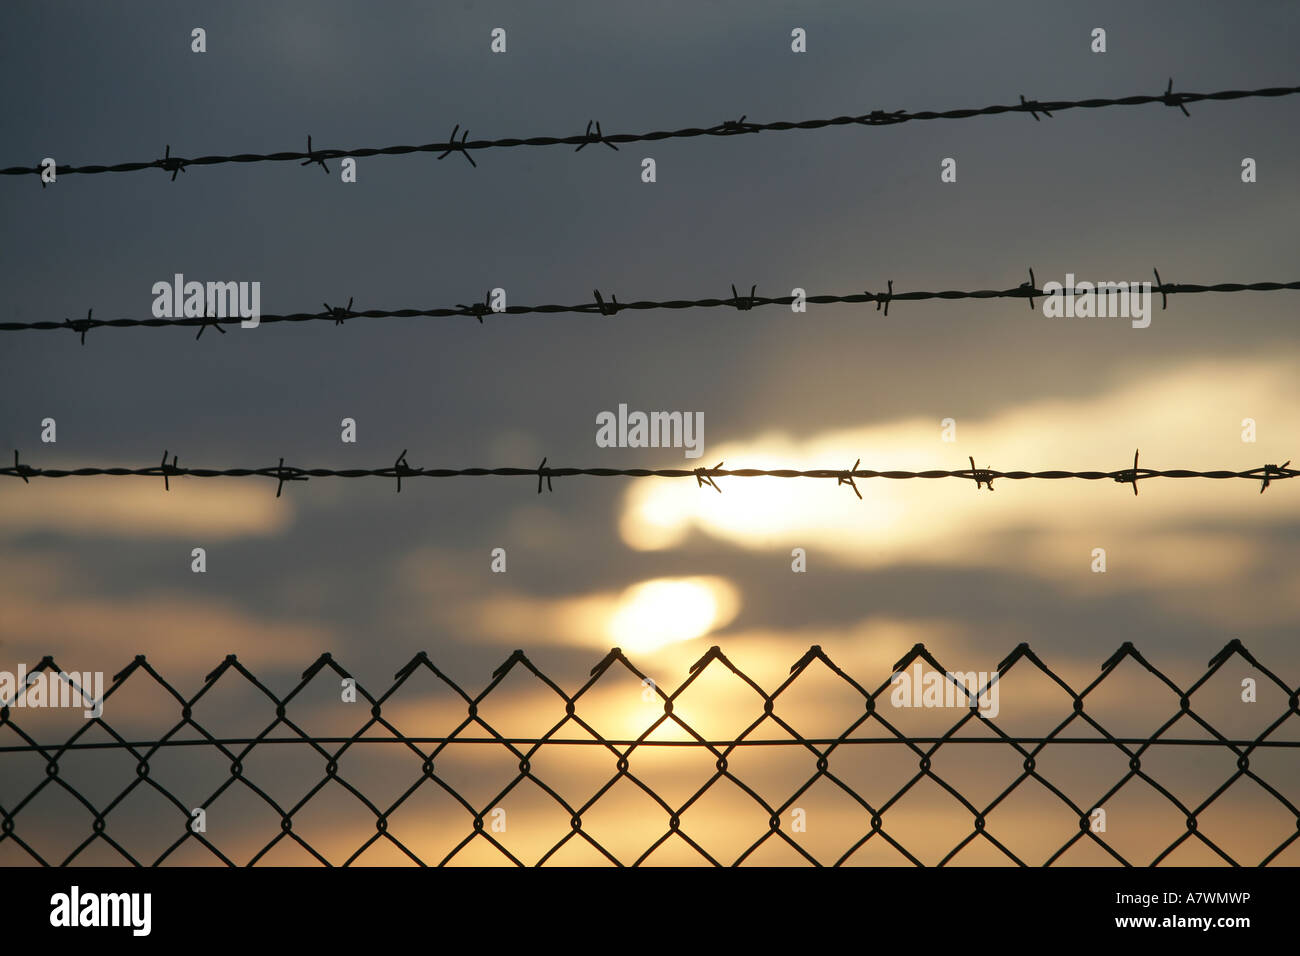 Netting wire with an barbwire above Stock Photo